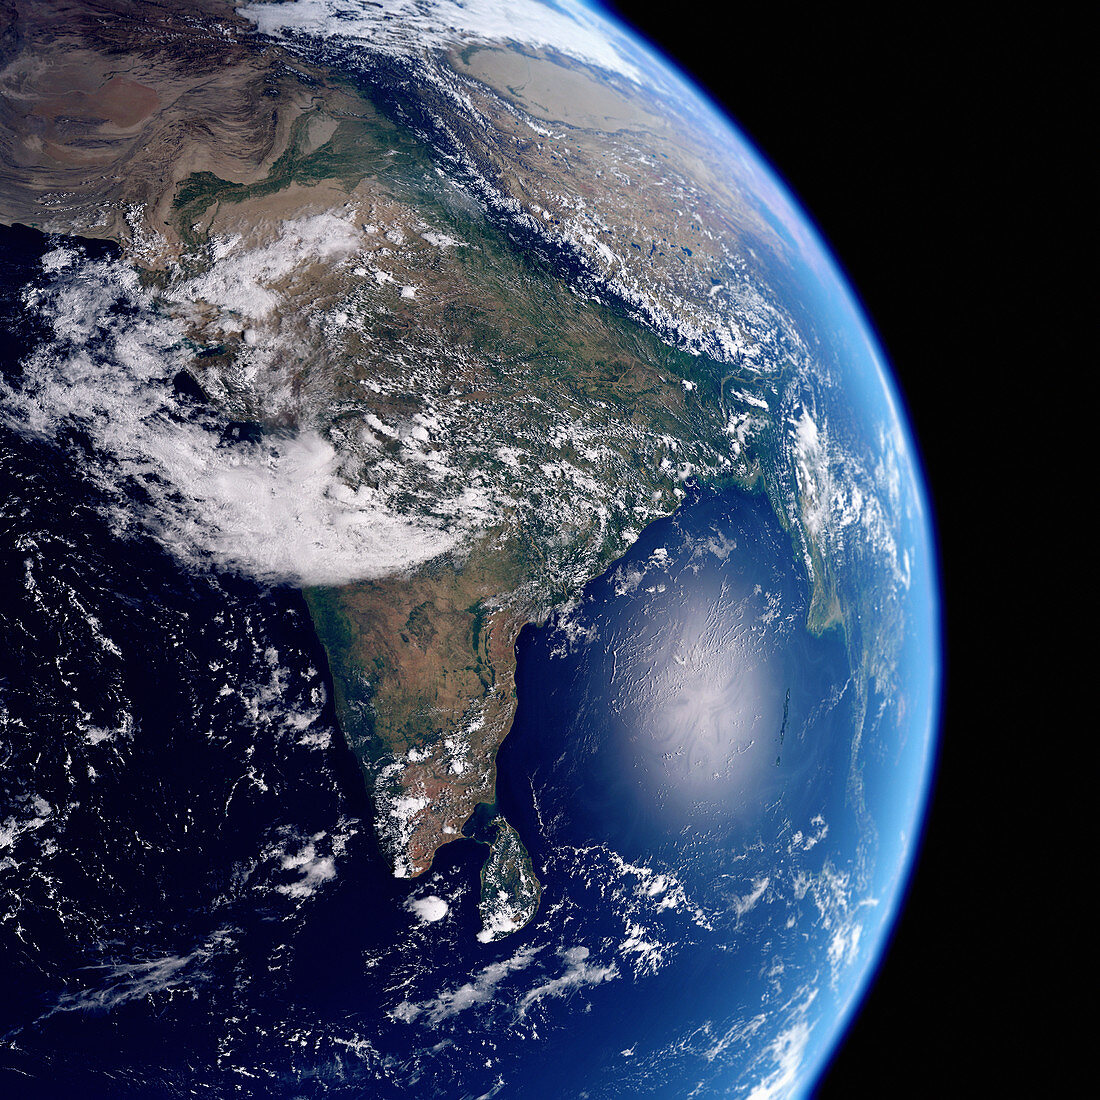 Earth from space showing India, illustration